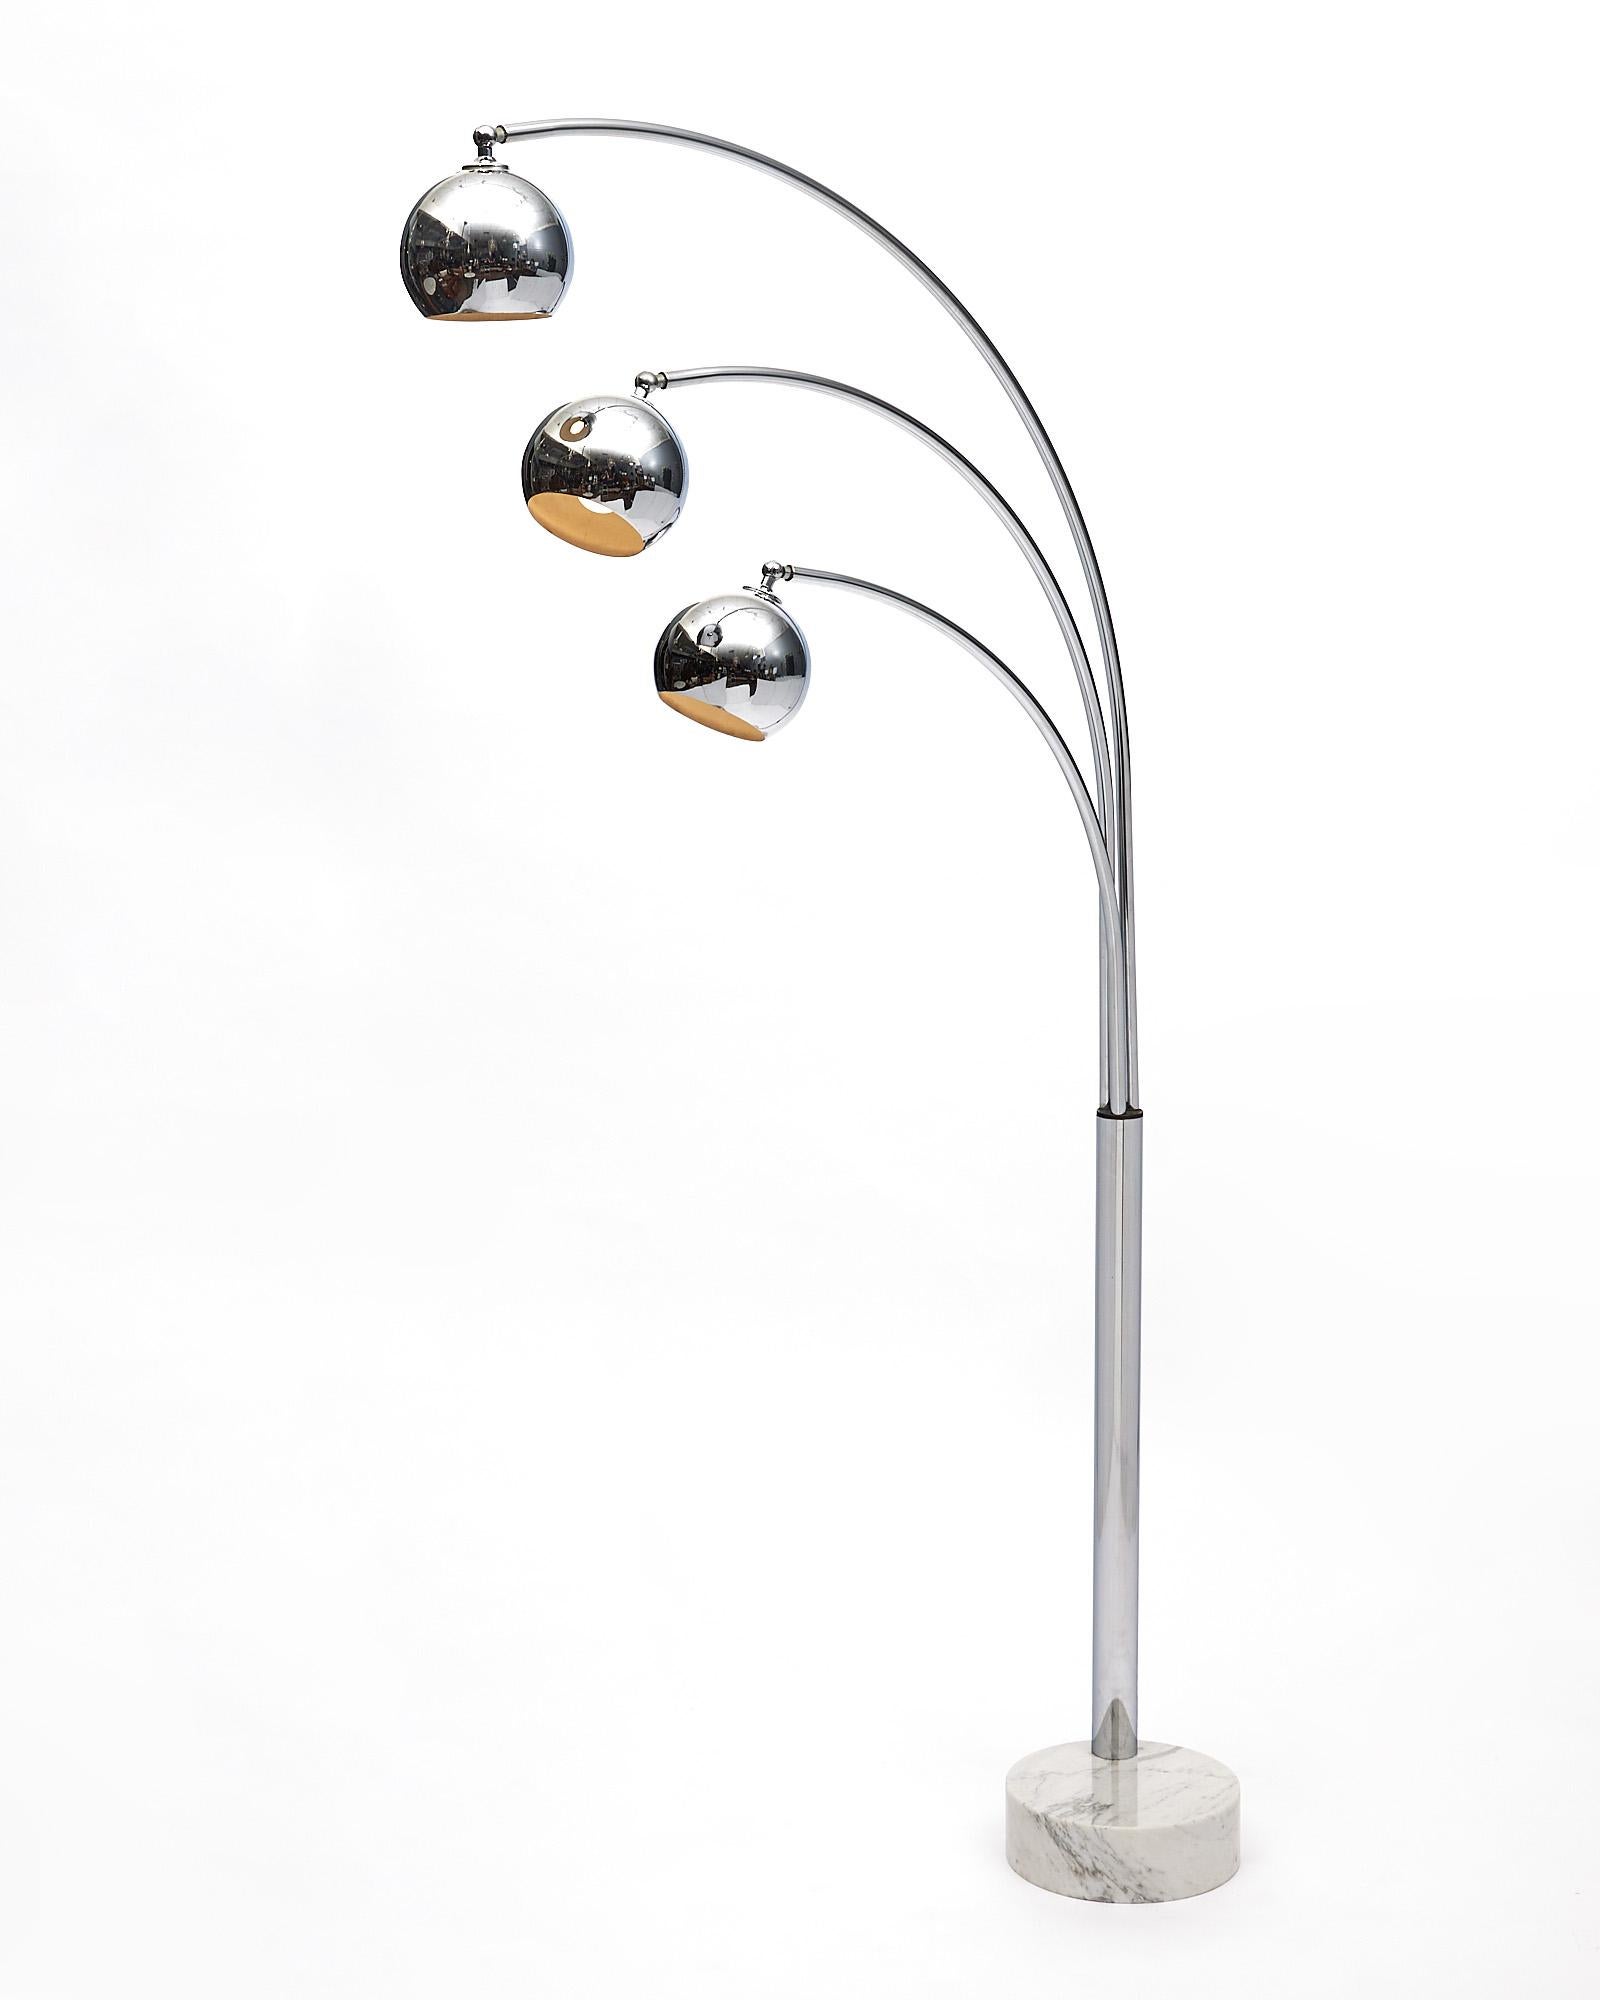 Arc floor lamp, Italian, from the mid-century made of chromed steel with a Carrara marble base. This piece is by Guzzini. It has been newly wired to fit US standards. The diameter of the base is 11.75”.